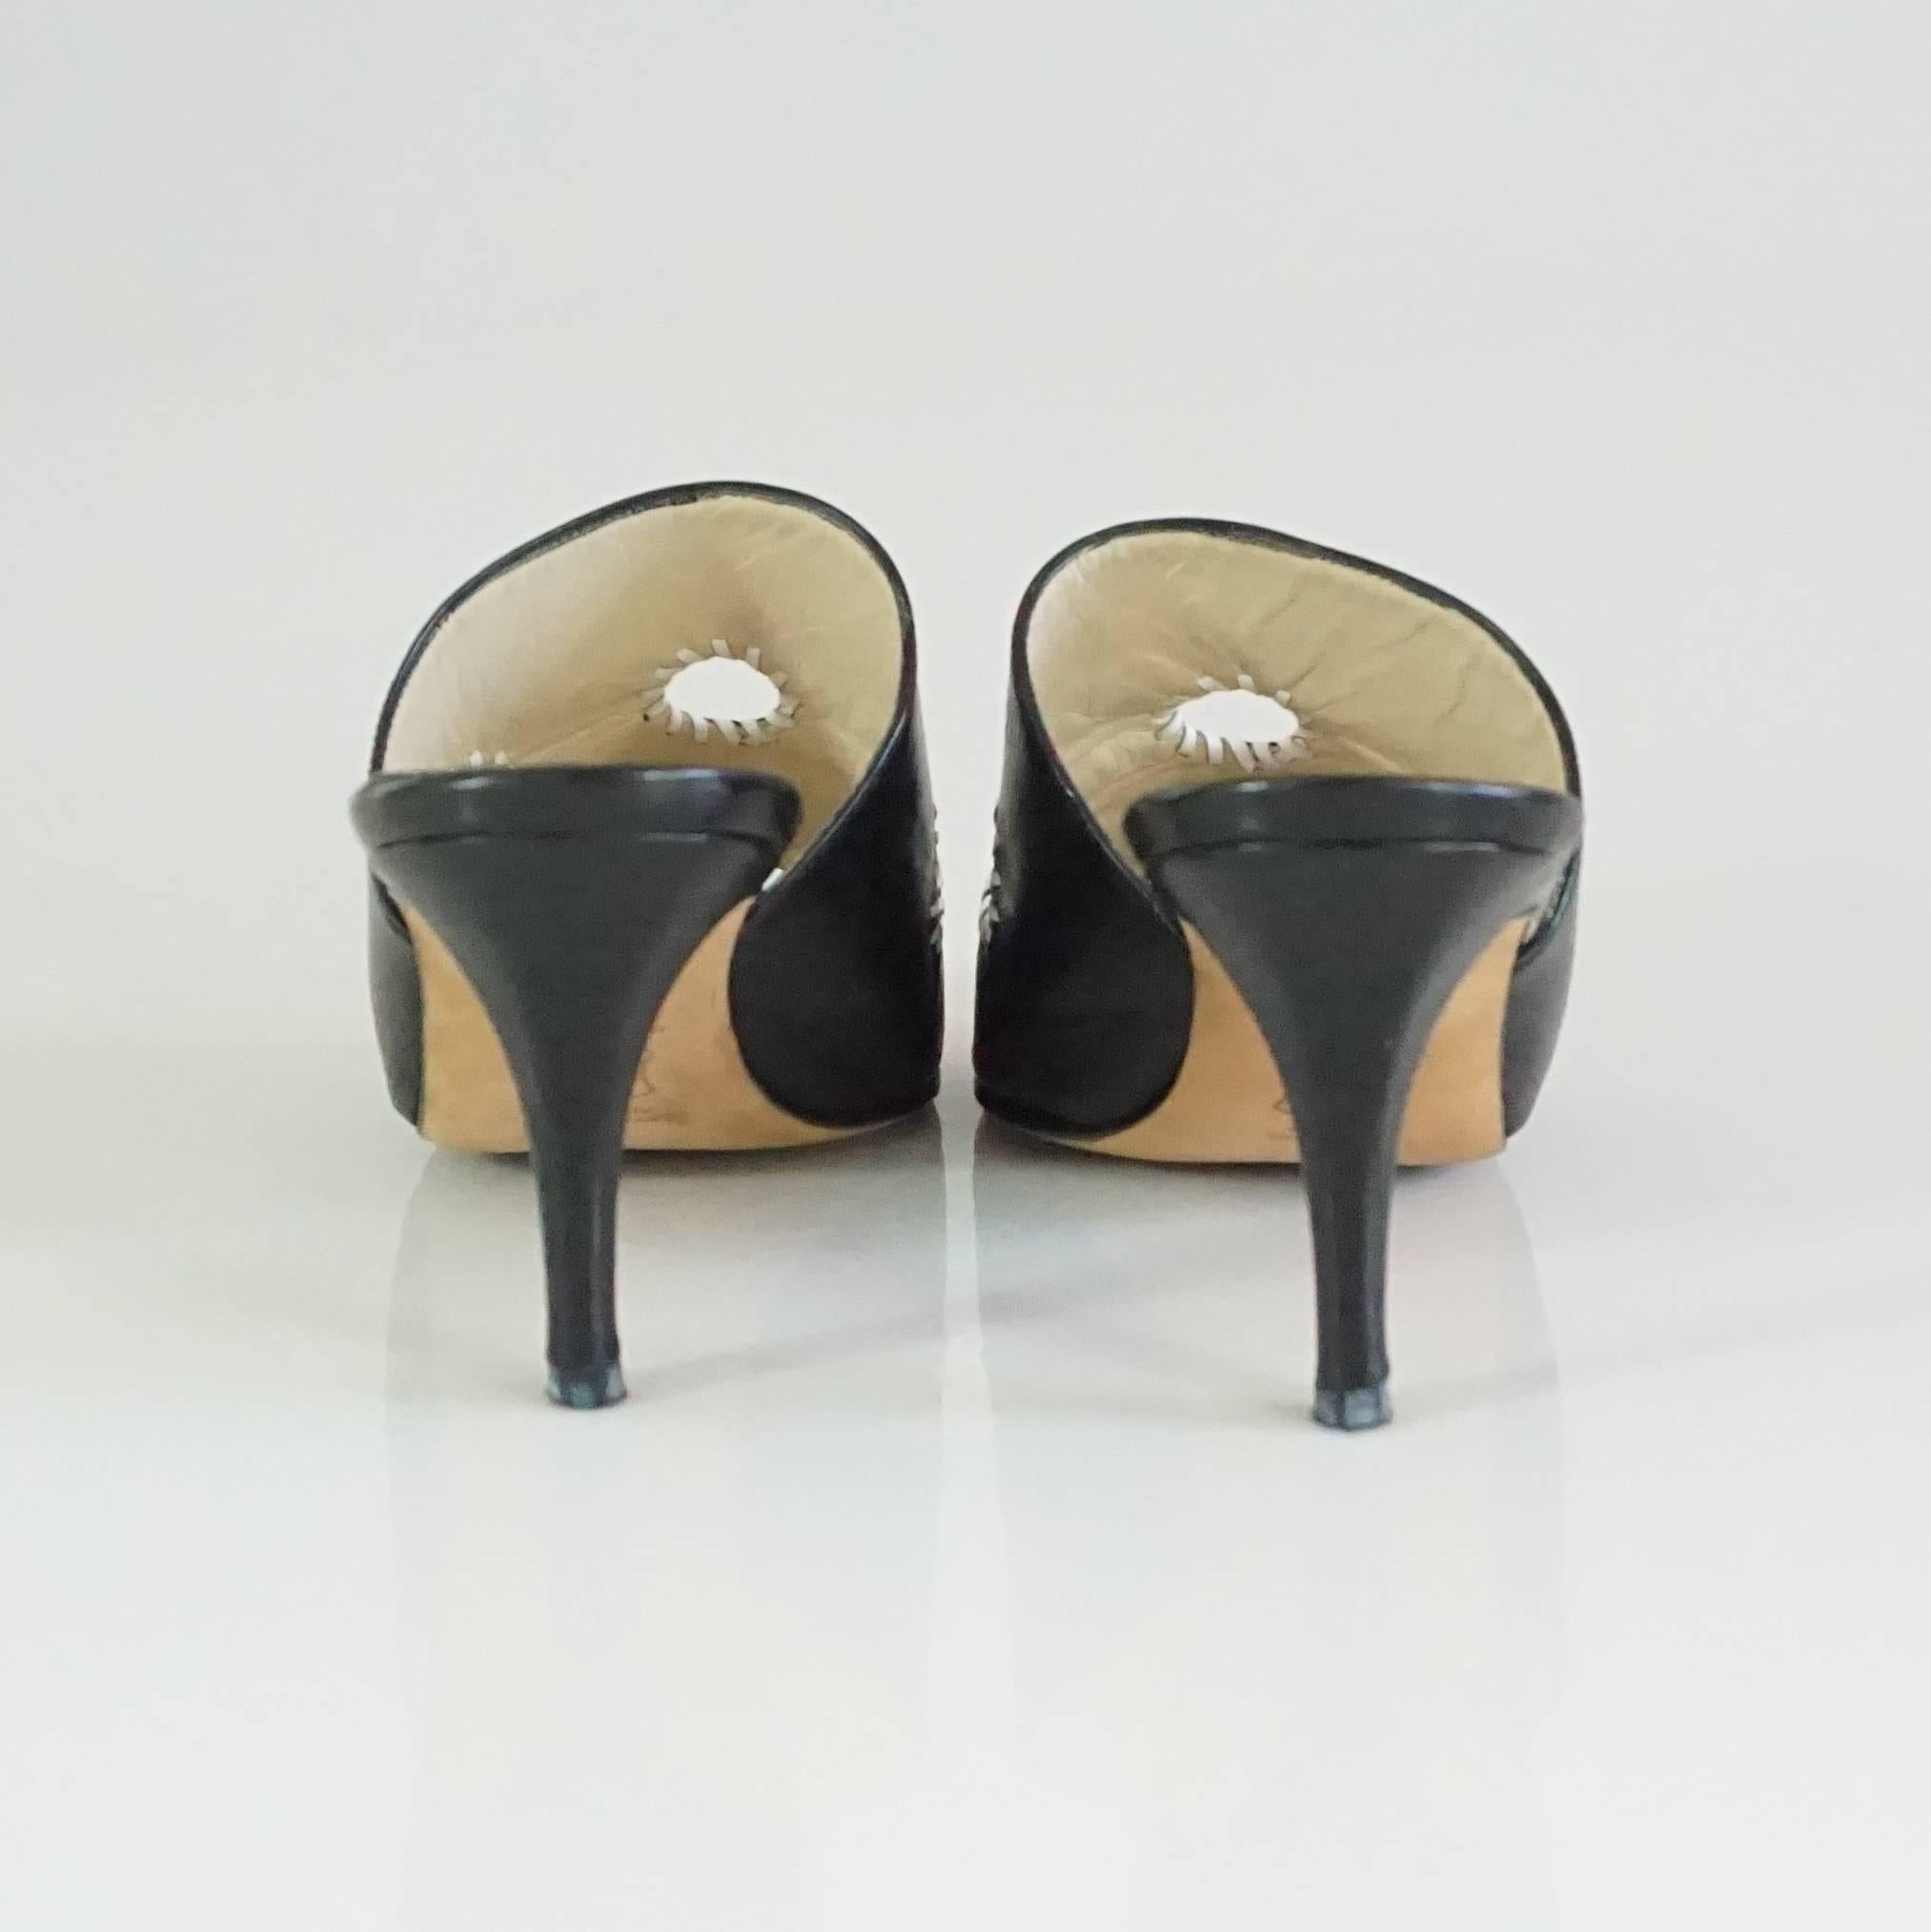 Women's Manolo Blahnik Black Leather Mules with White Stitched Cutouts - 37